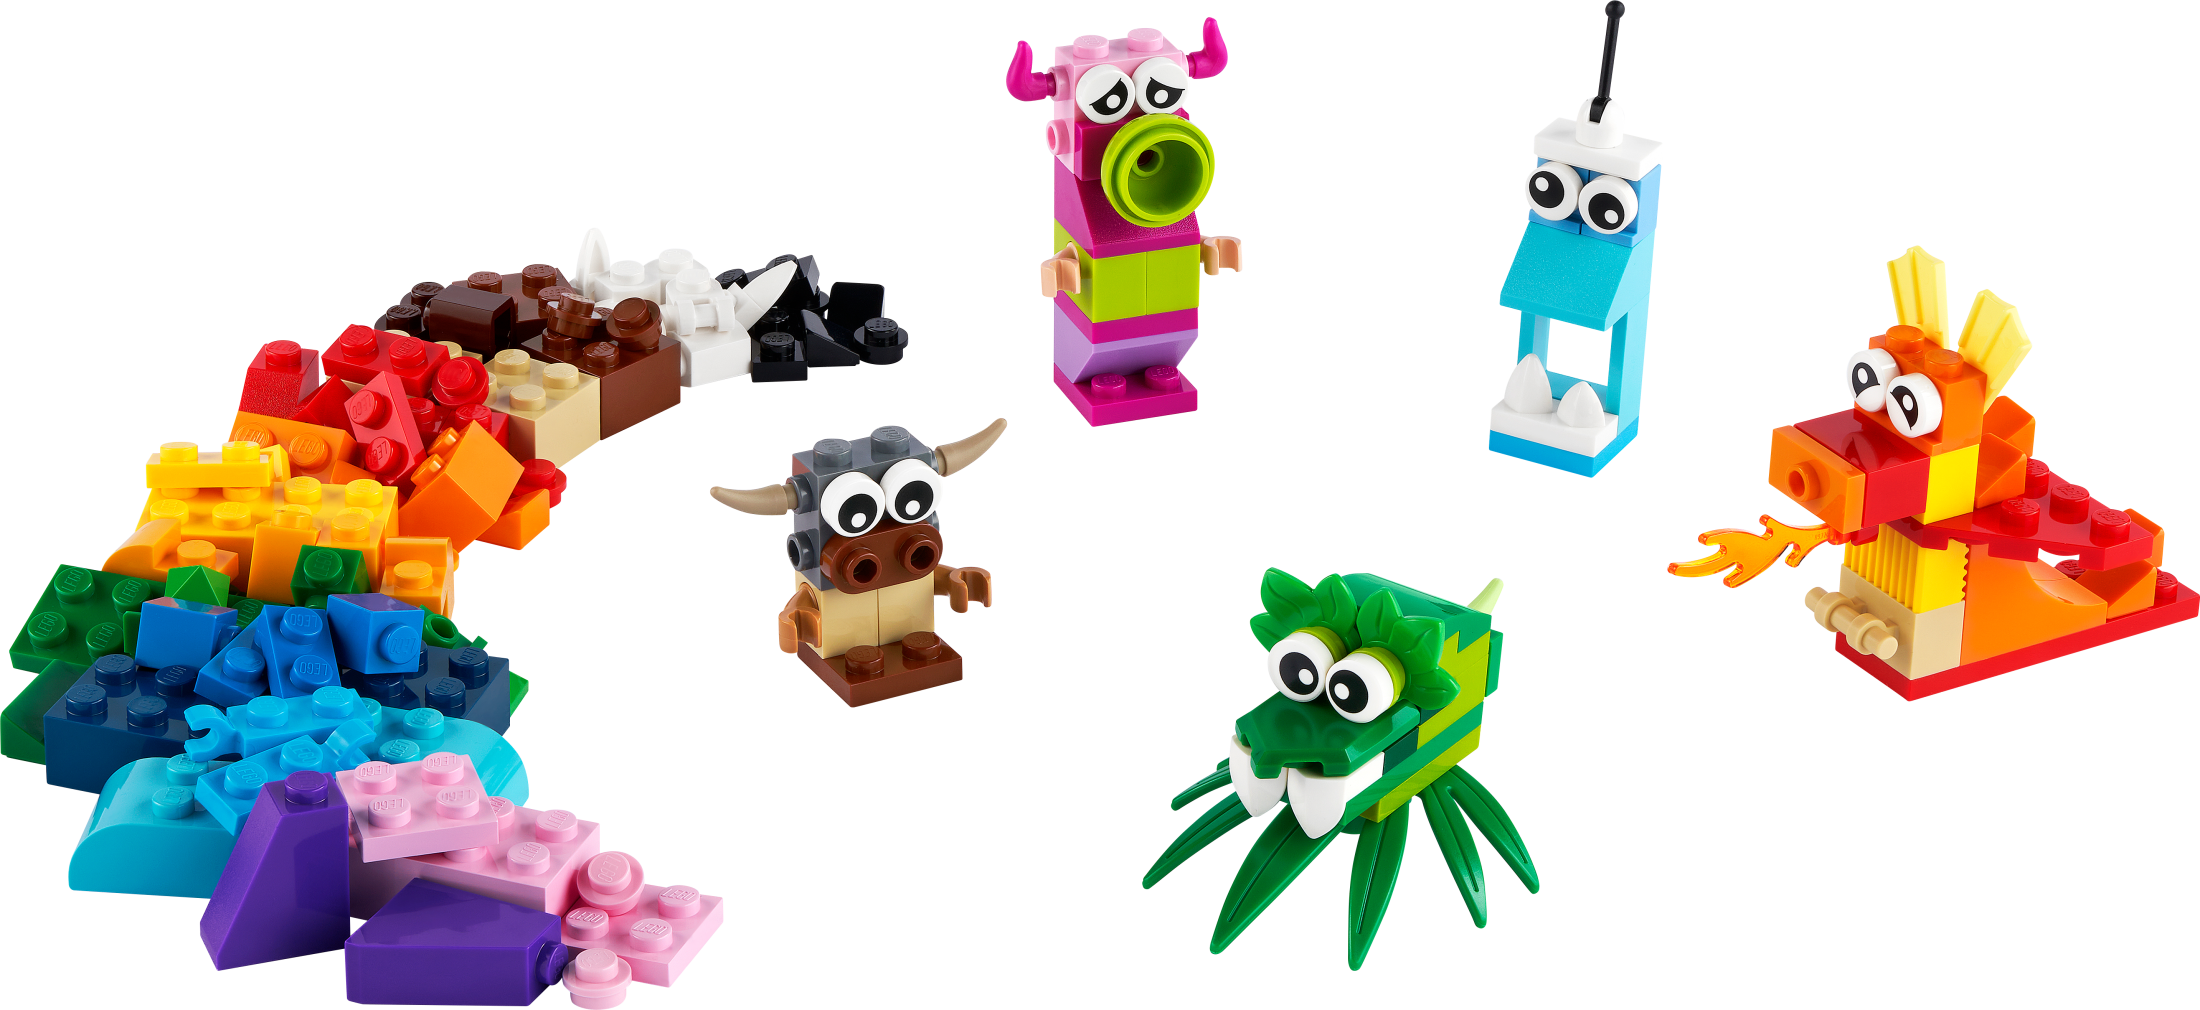 LEGO Classic Creative Monsters 11017 Building Kit, Includes 5 Monster Toy Mini Build Ideas to Inspire Creative Play for Kids Ages 4 and Up, Children can Build and Be Inspired by LEGO Masters - image 4 of 8